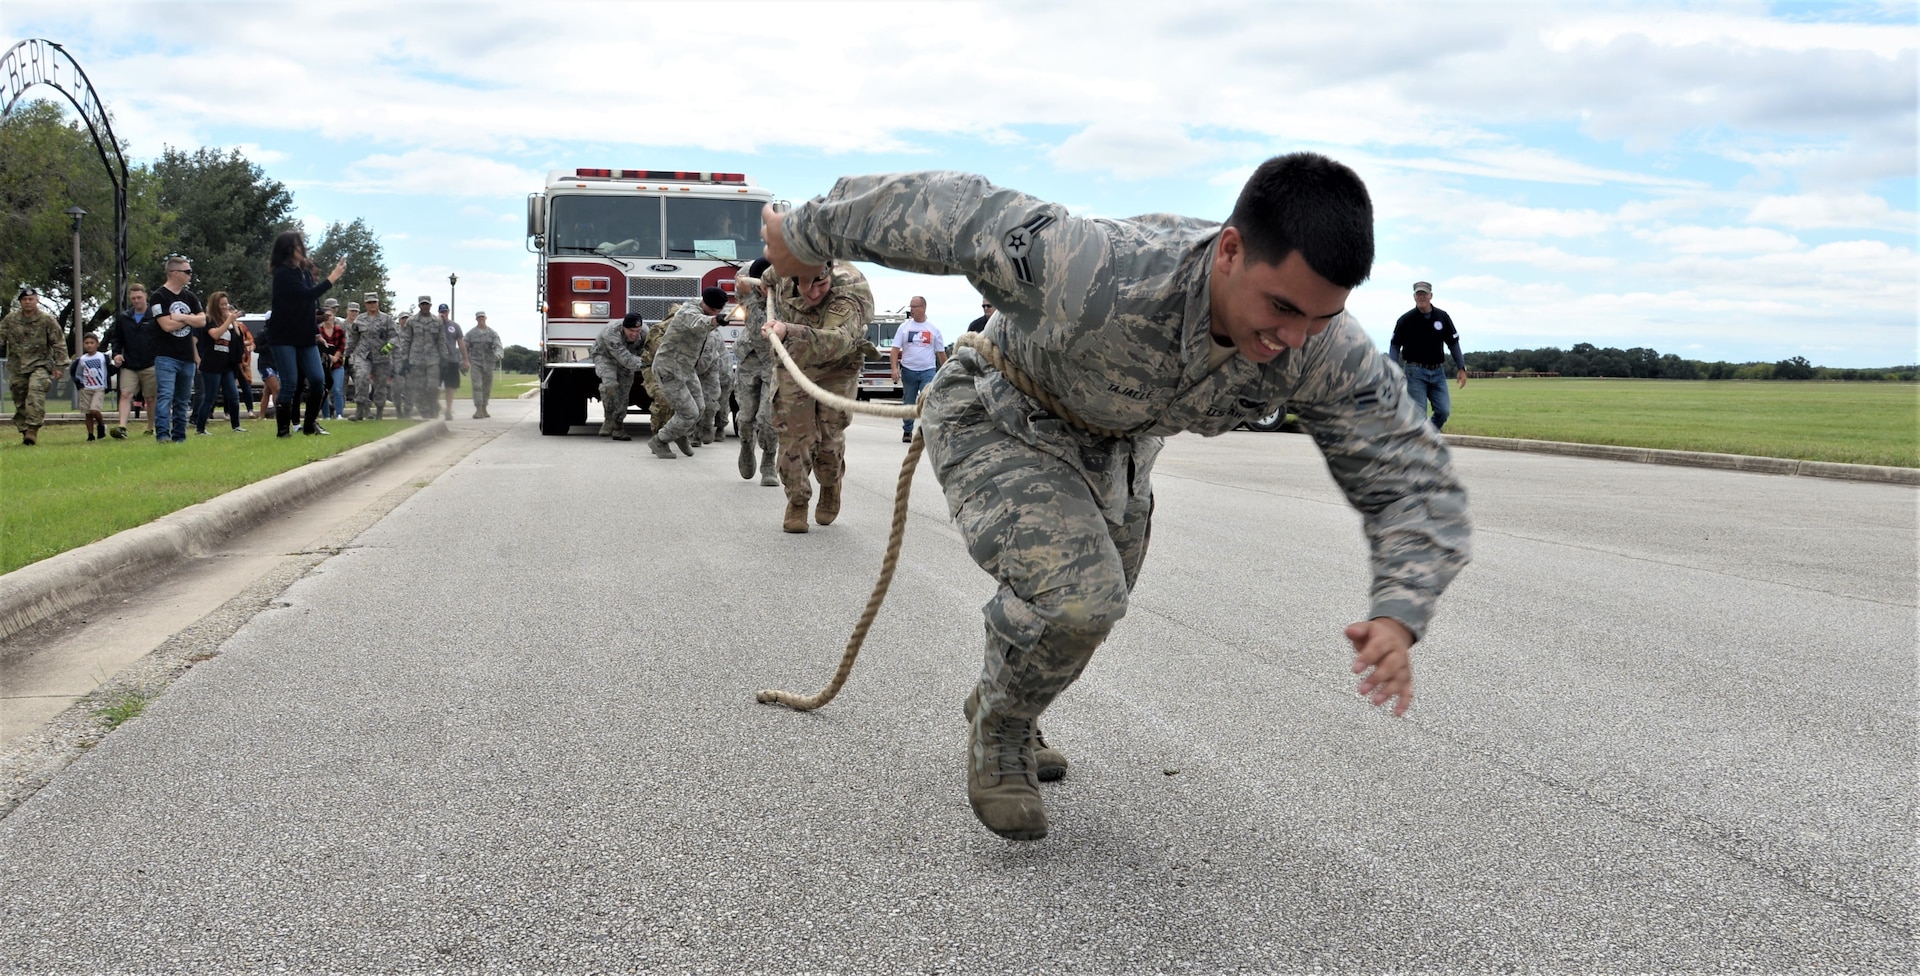 Airman 1st Class Jared Tajalle, 902nd Security Forces Squadron patrolman, and fellow 902nd SFS members pull a fire truck Oct. 20, 2018, during the final challenge of the 2018 Battle of the Badges at Eberle Park, Joint Base San Antonio-Randolph, Texas. Battle of the Badges takes place each year to build camaraderie, espirit de corps and cohesion among JBSA first responders through various competitive challenges taken from their daily missions.